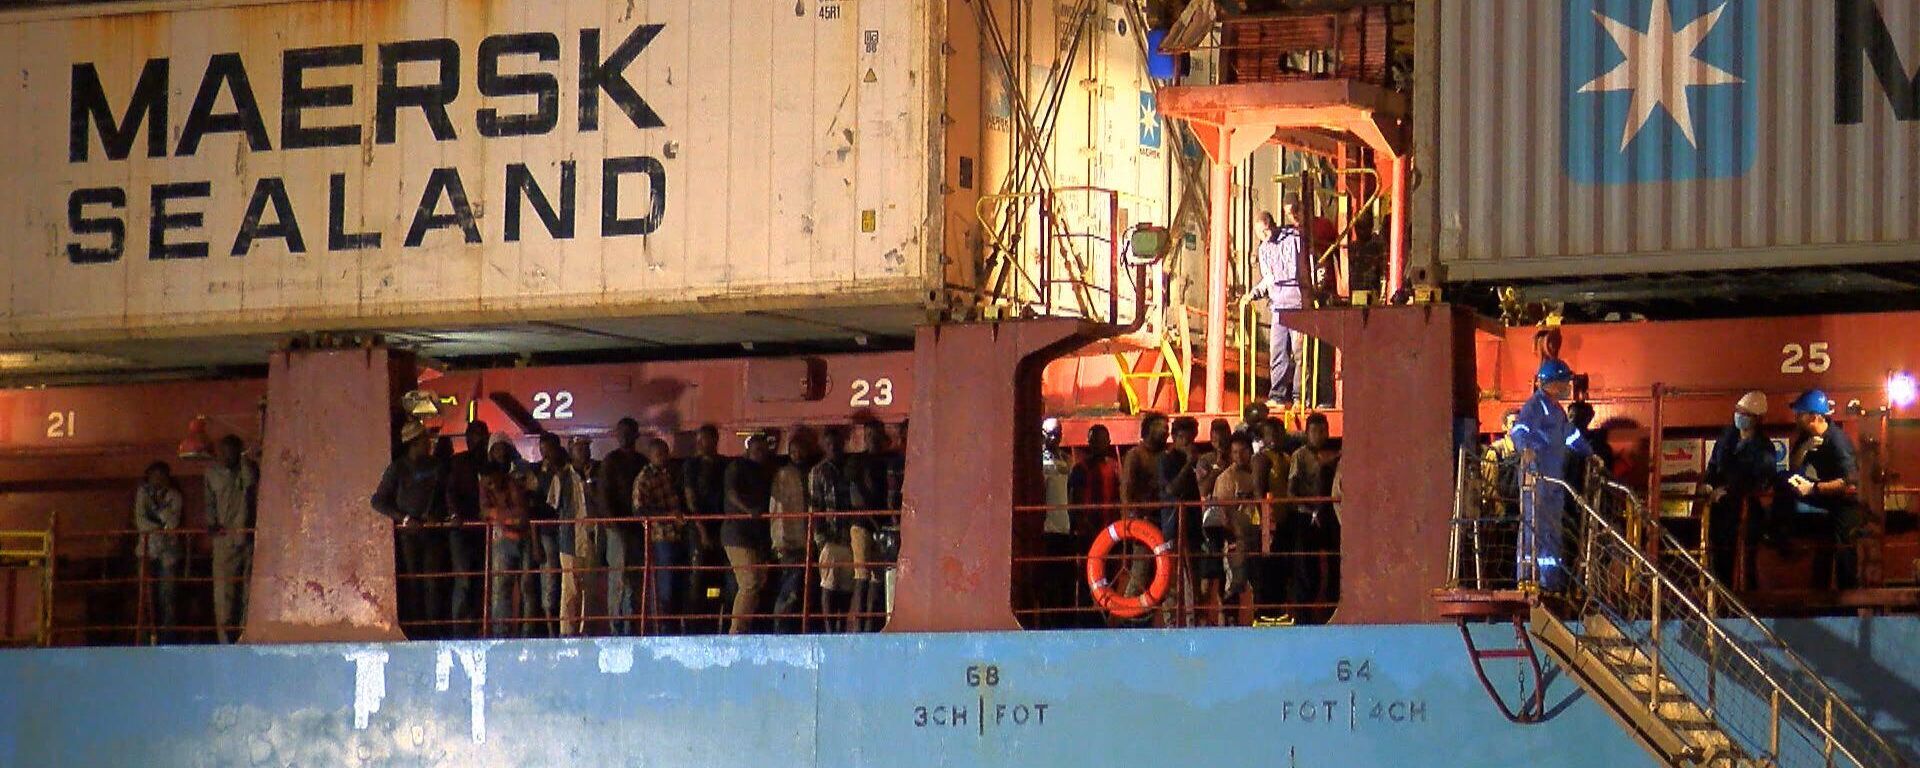 In this video grab made on June 26, 2018 from an AFP video, rescued migrants are seen waiting to disembark from the Danish container ship, the Alexander Maersk, at the port of Sicilian port of Pozzallo. - A Danish cargo ship owned by Maersk, the world's leading container shipping company, with 108 migrants on board was allowed to dock at the southern Sicilian port of Pozzallo Monday, after waiting offshore for three days for instructions from the Italian authorities. (Photo by Alessio TRICANI / AFP) - Sputnik International, 1920, 20.04.2022